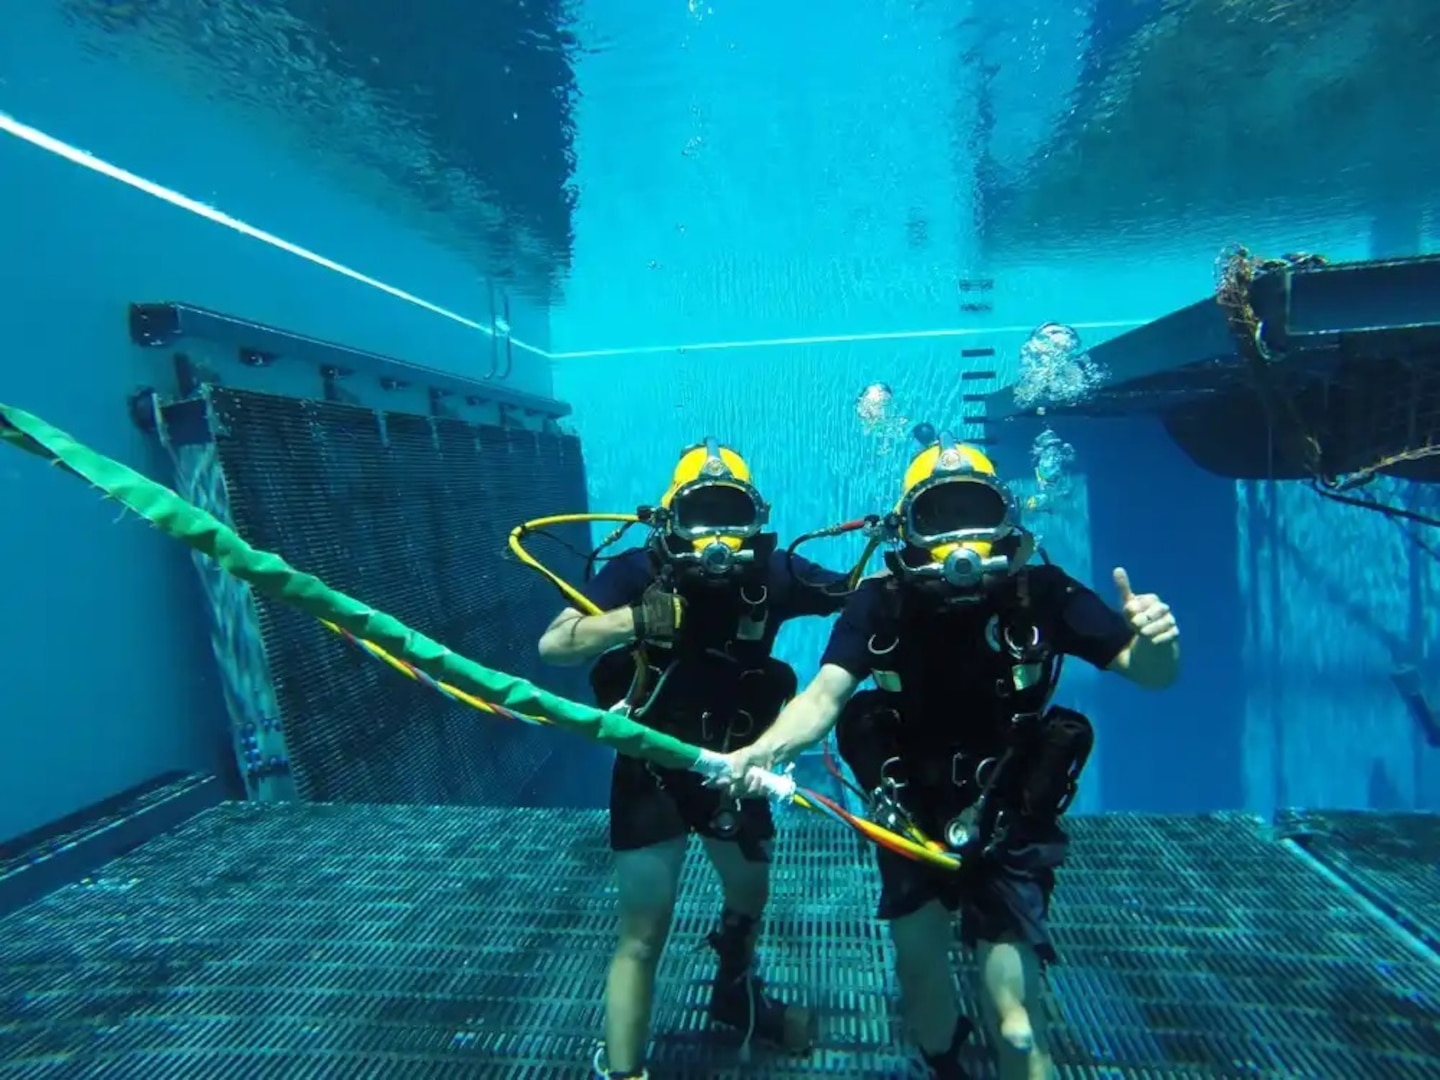 Petty Officer 1st Class Chris Hall (left) diver, and Coast Guard Rear Adm. John Nadeau at the bottom of the pool demonstrating the capabilities of surface supplied diving gear at Naval Diving and Salvage Training Center in Panama City, Florida., July 9, 2015. Nadeau visited the NDSTC and performed a familiarization dive with Coast Guard Divers in the Aquatic Training Facility. (U.S. Coast Guard photo by Petty Officer 1st Class Michael Garst)